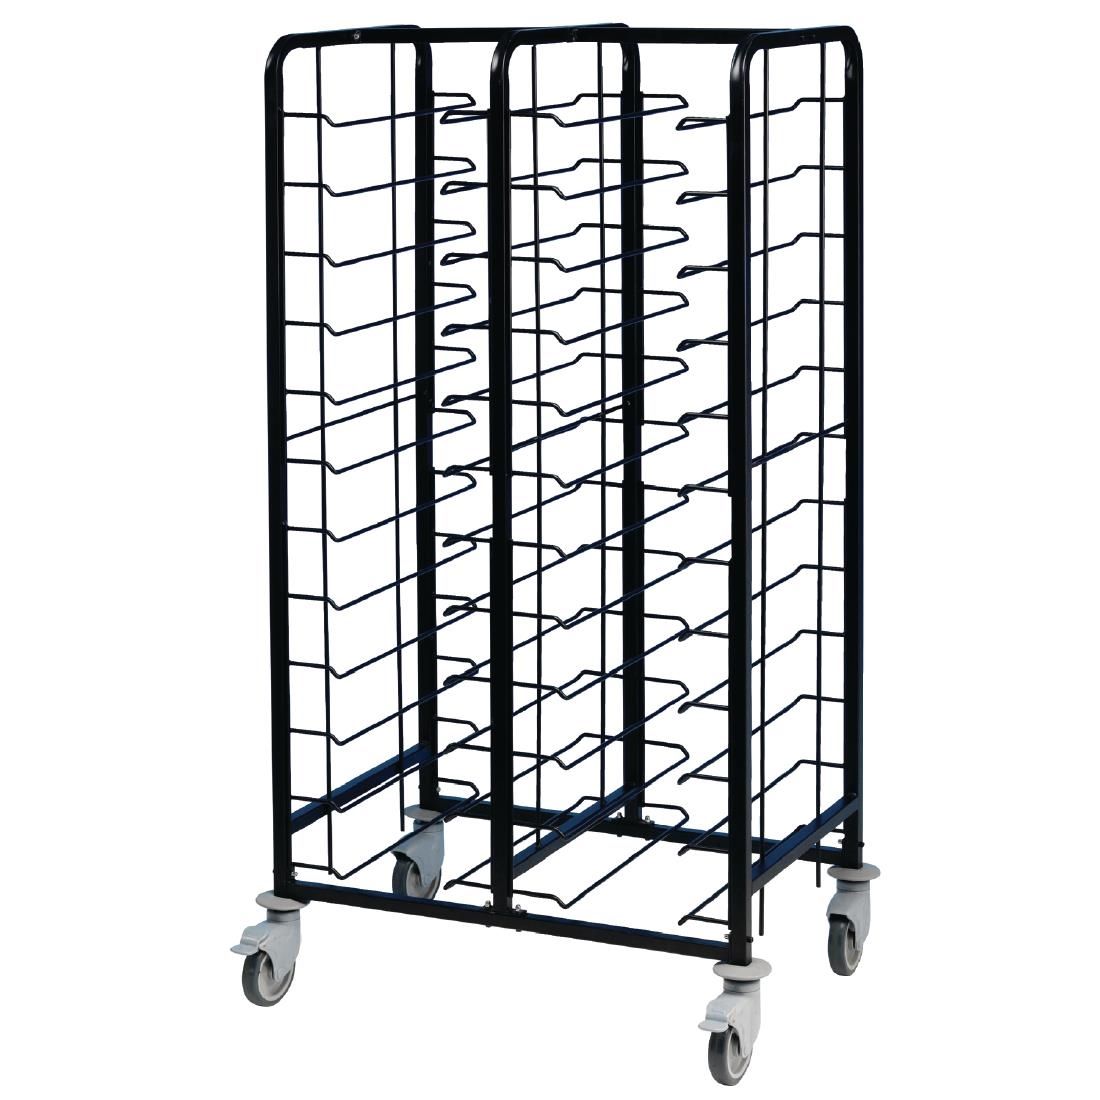 DP291 EAIS Powder Coated Enamel Clearing Trolley 24 Shelves JD Catering Equipment Solutions Ltd